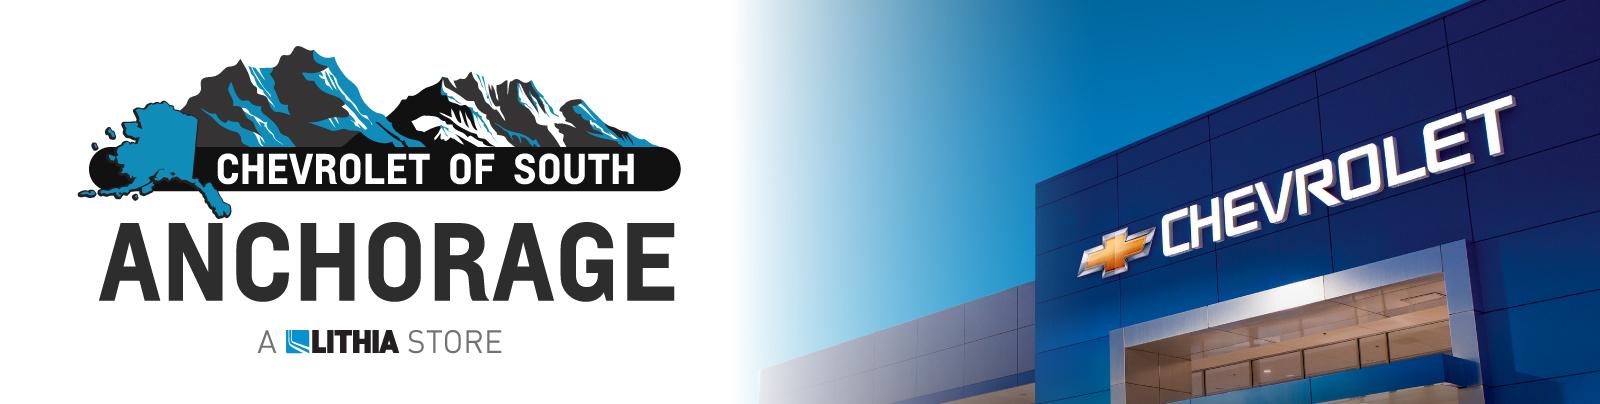 Chevrolet of South Anchorage is Proud To Serve Our Local ANCHORAGE Community